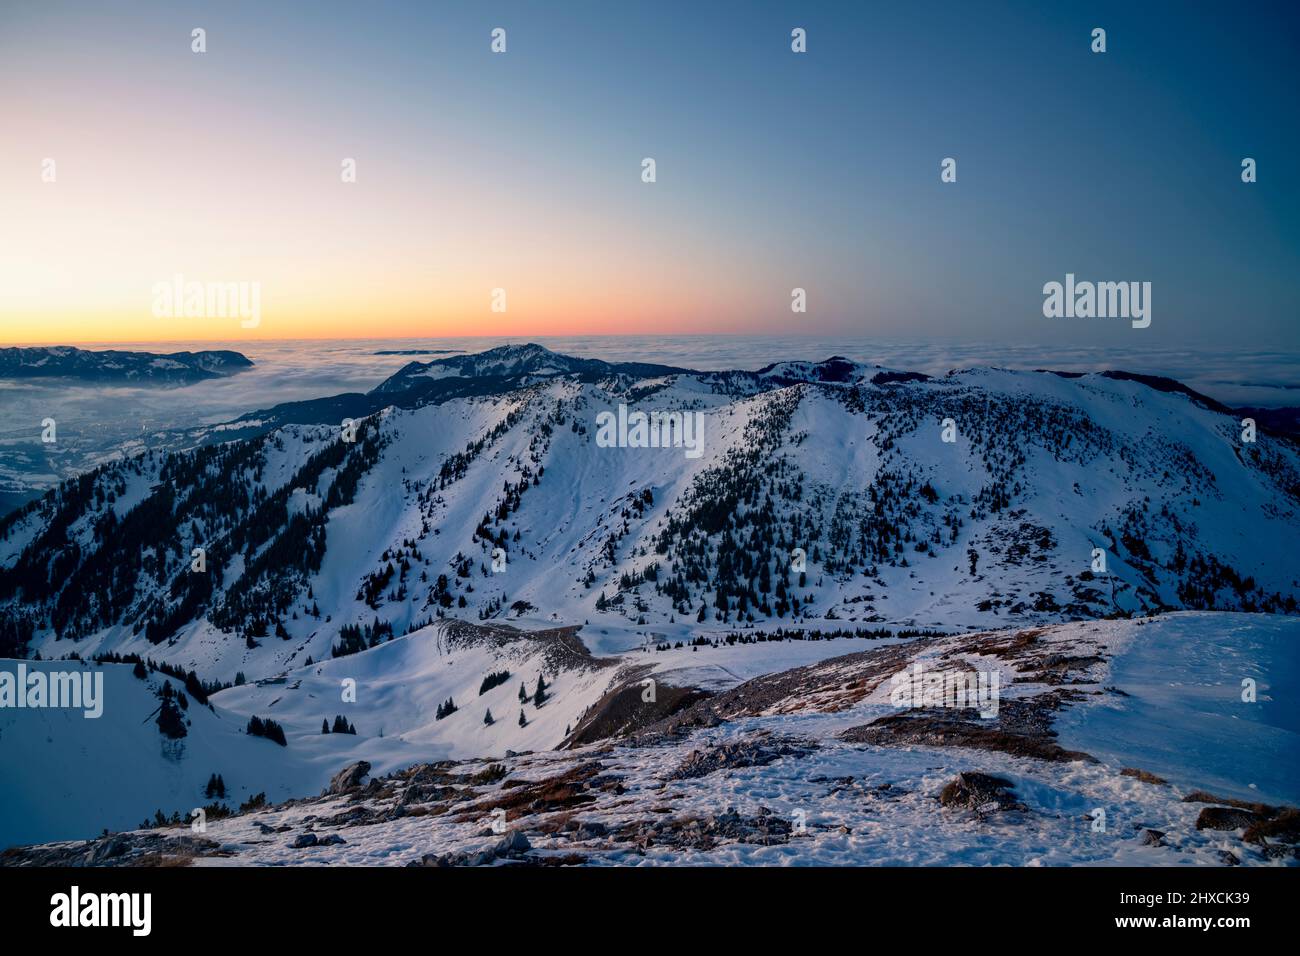 Alpine mountain landscape on a cold winter day after sunset. View from the top of Bscheisser towards Illertal valley. Allgäu Alps, Bavaria, Germany, Europe Stock Photo